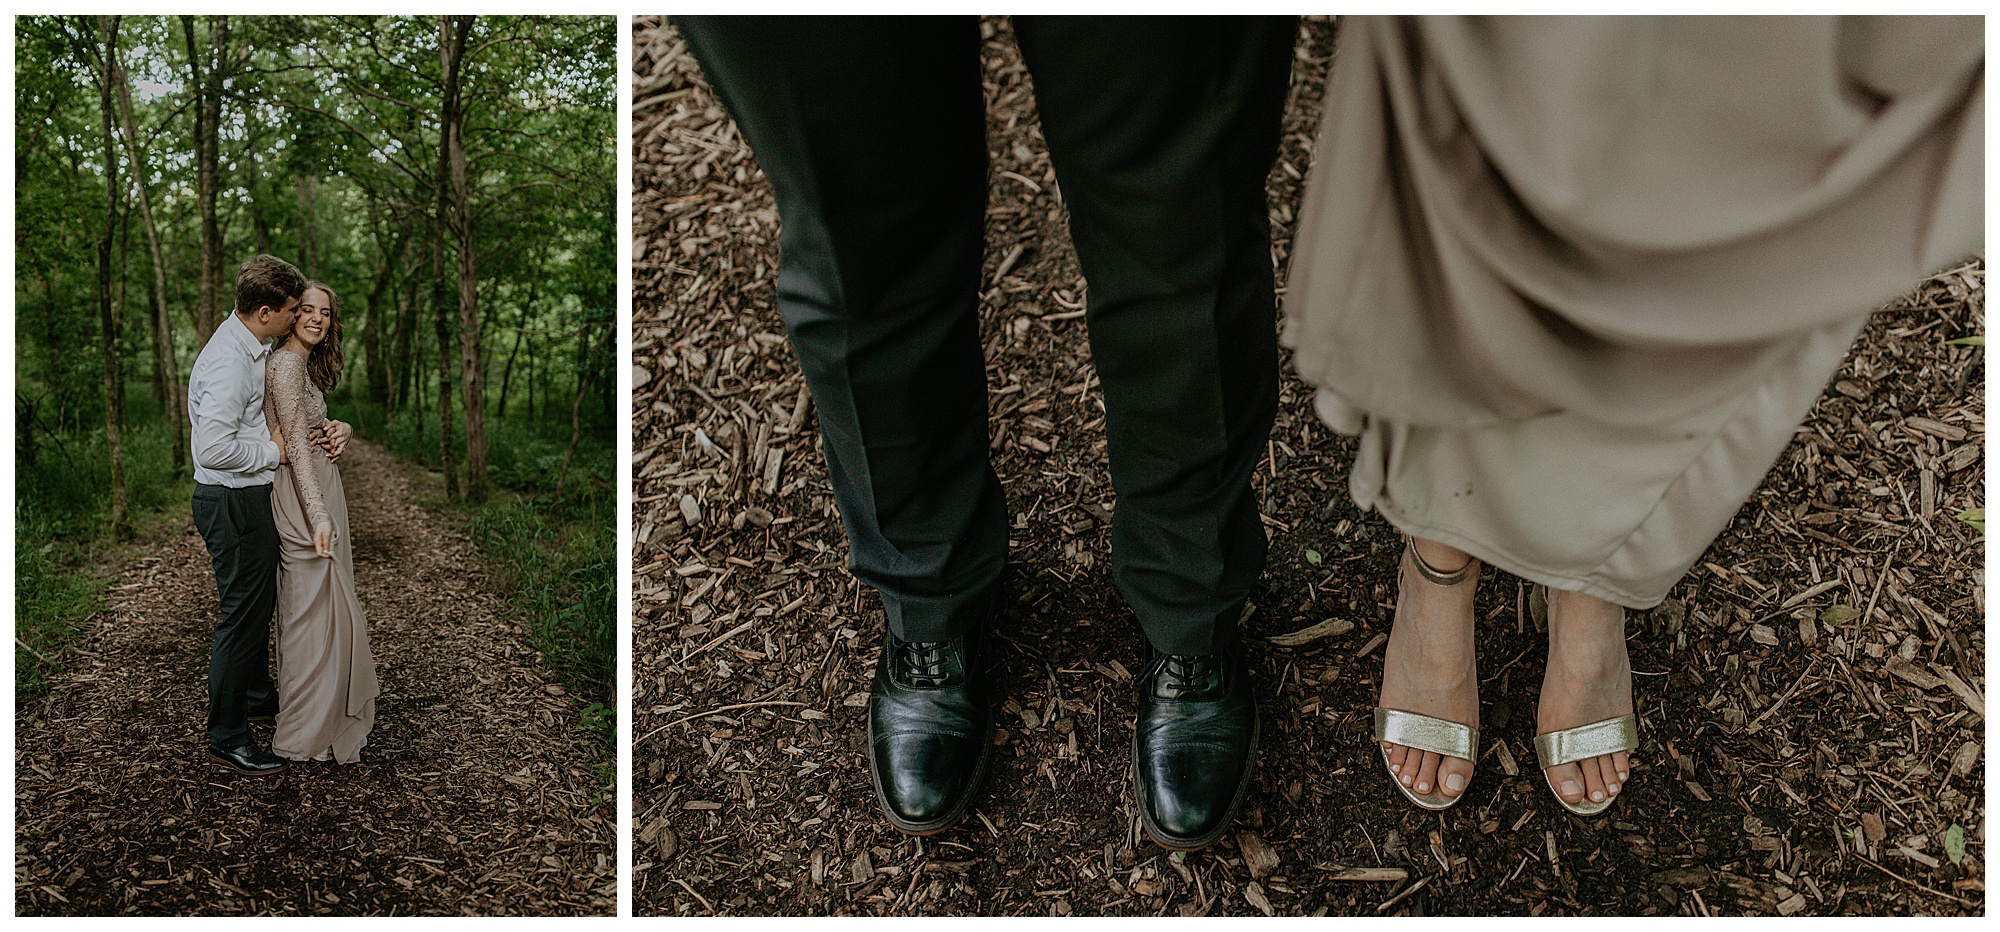 A couple during their engagement photos at Radnor State Park